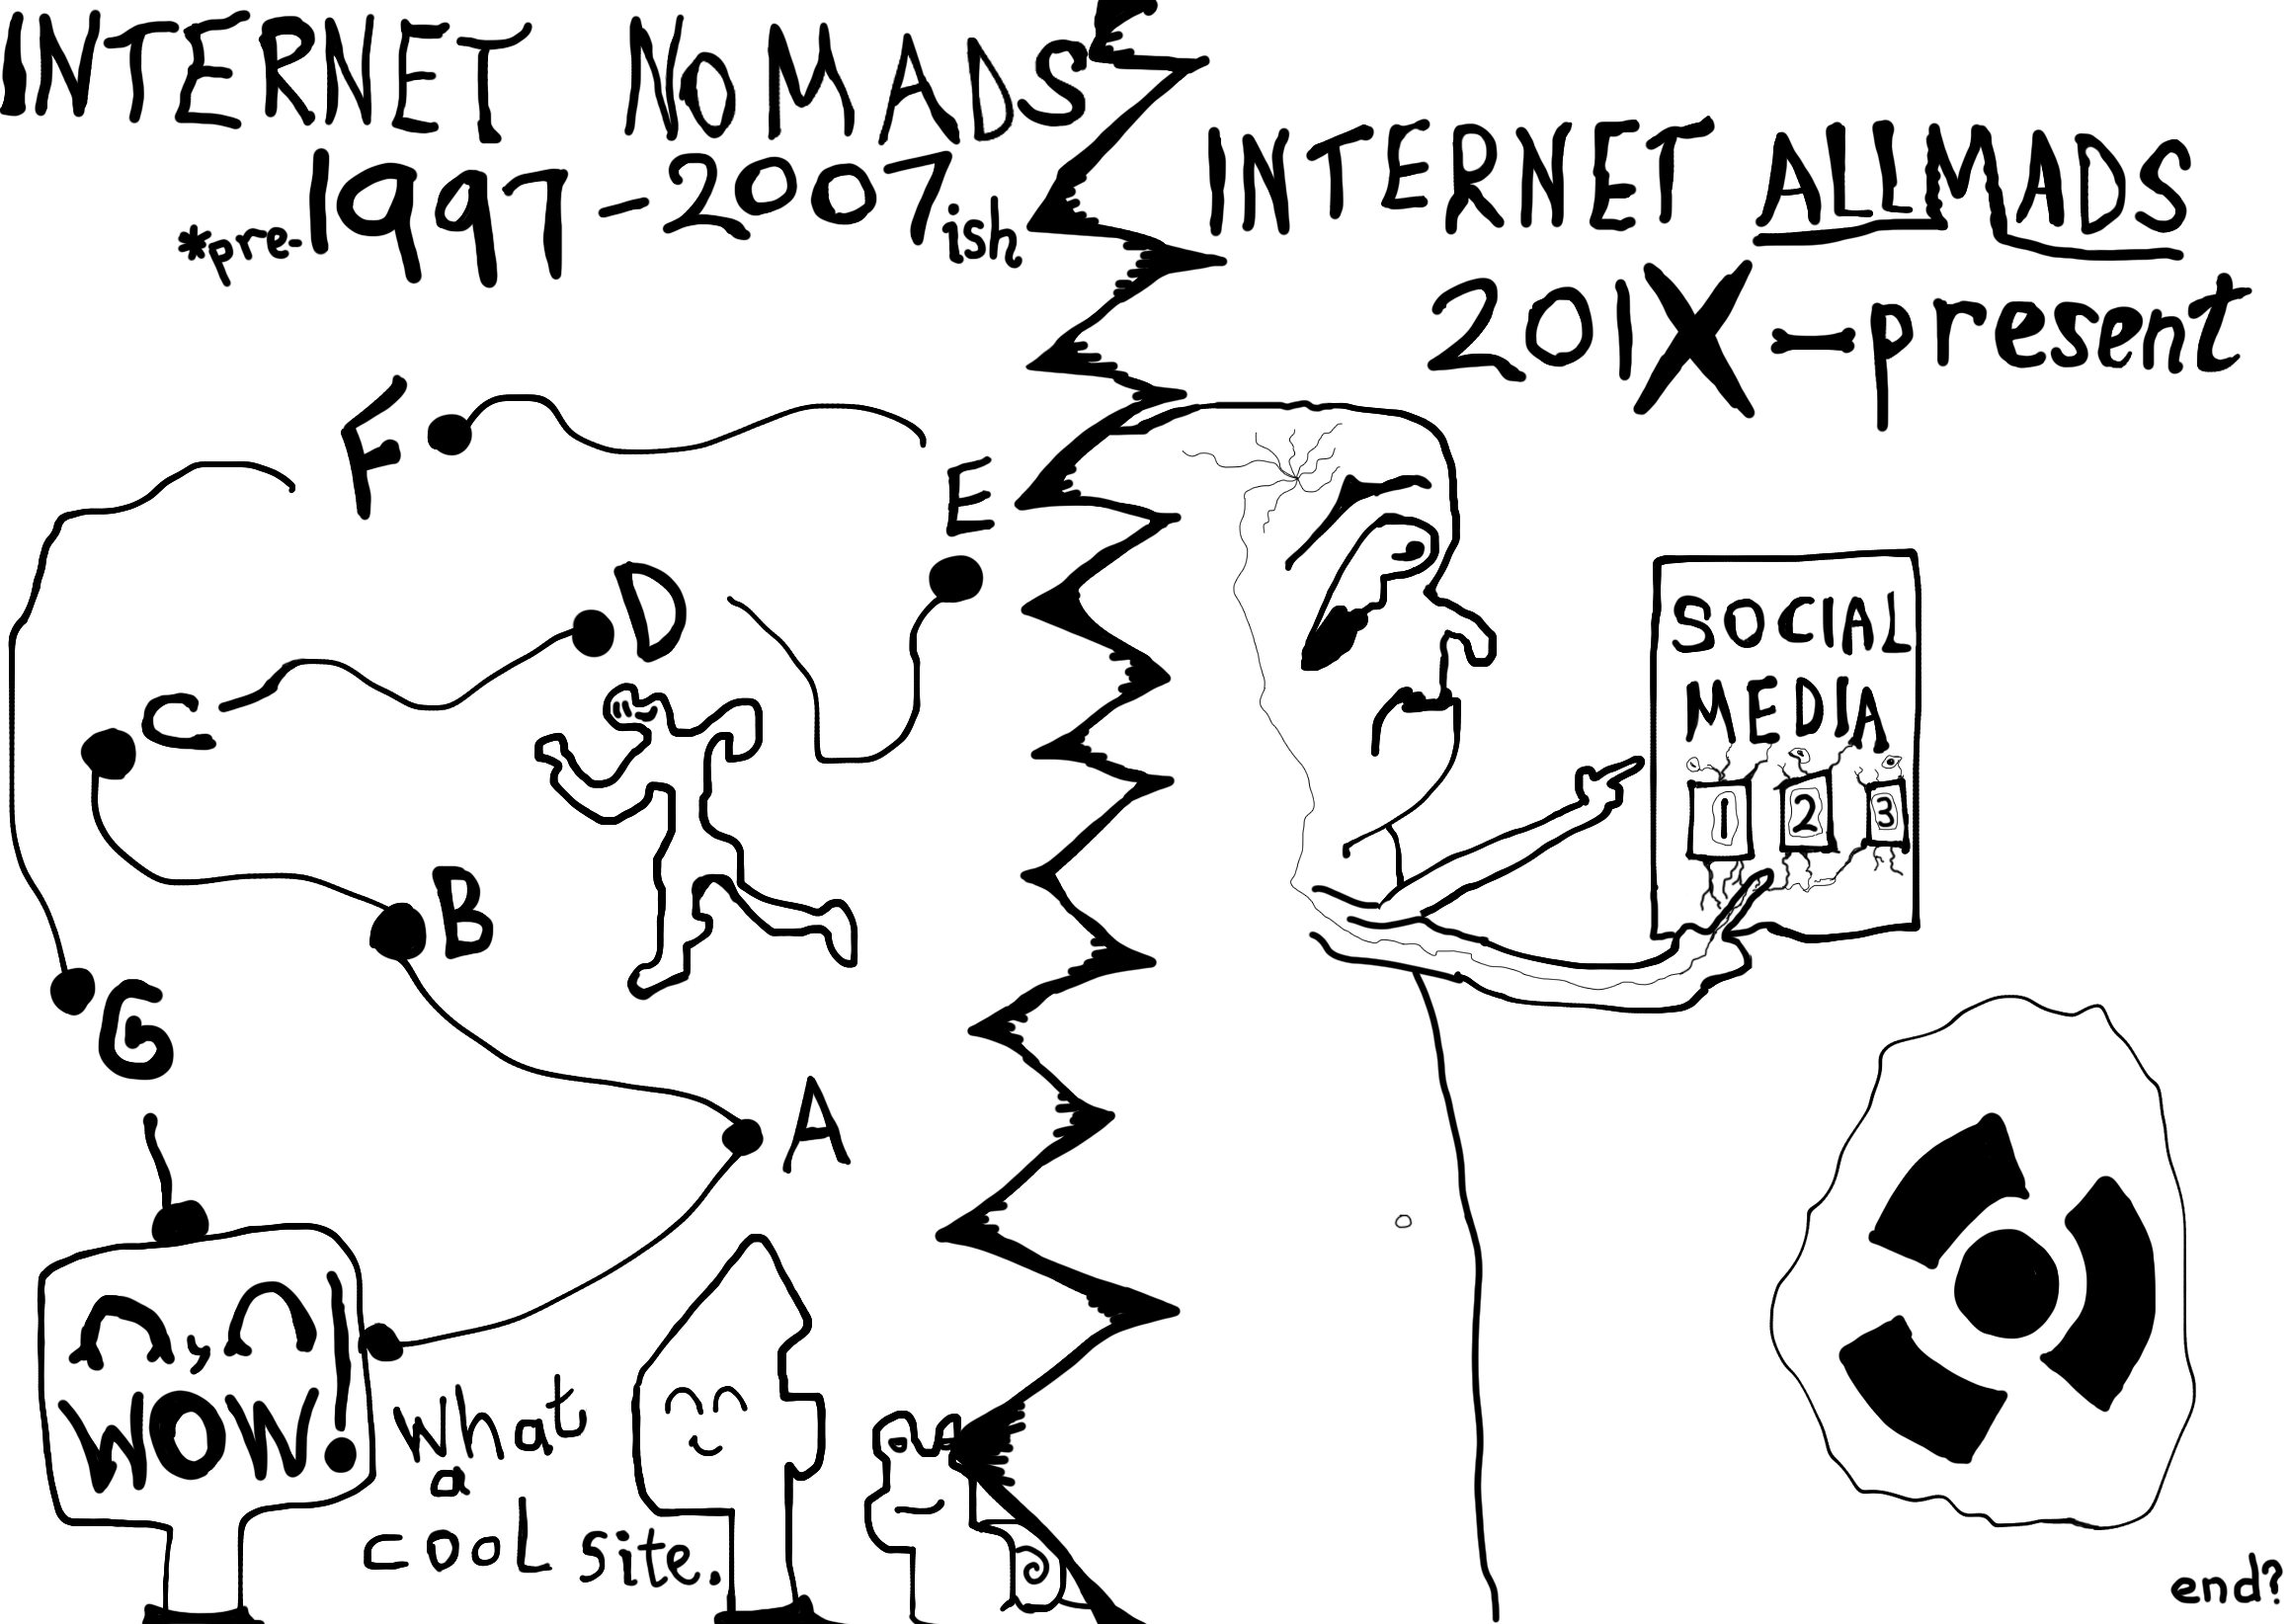 Mx Manners № 47 - Internet Nomads